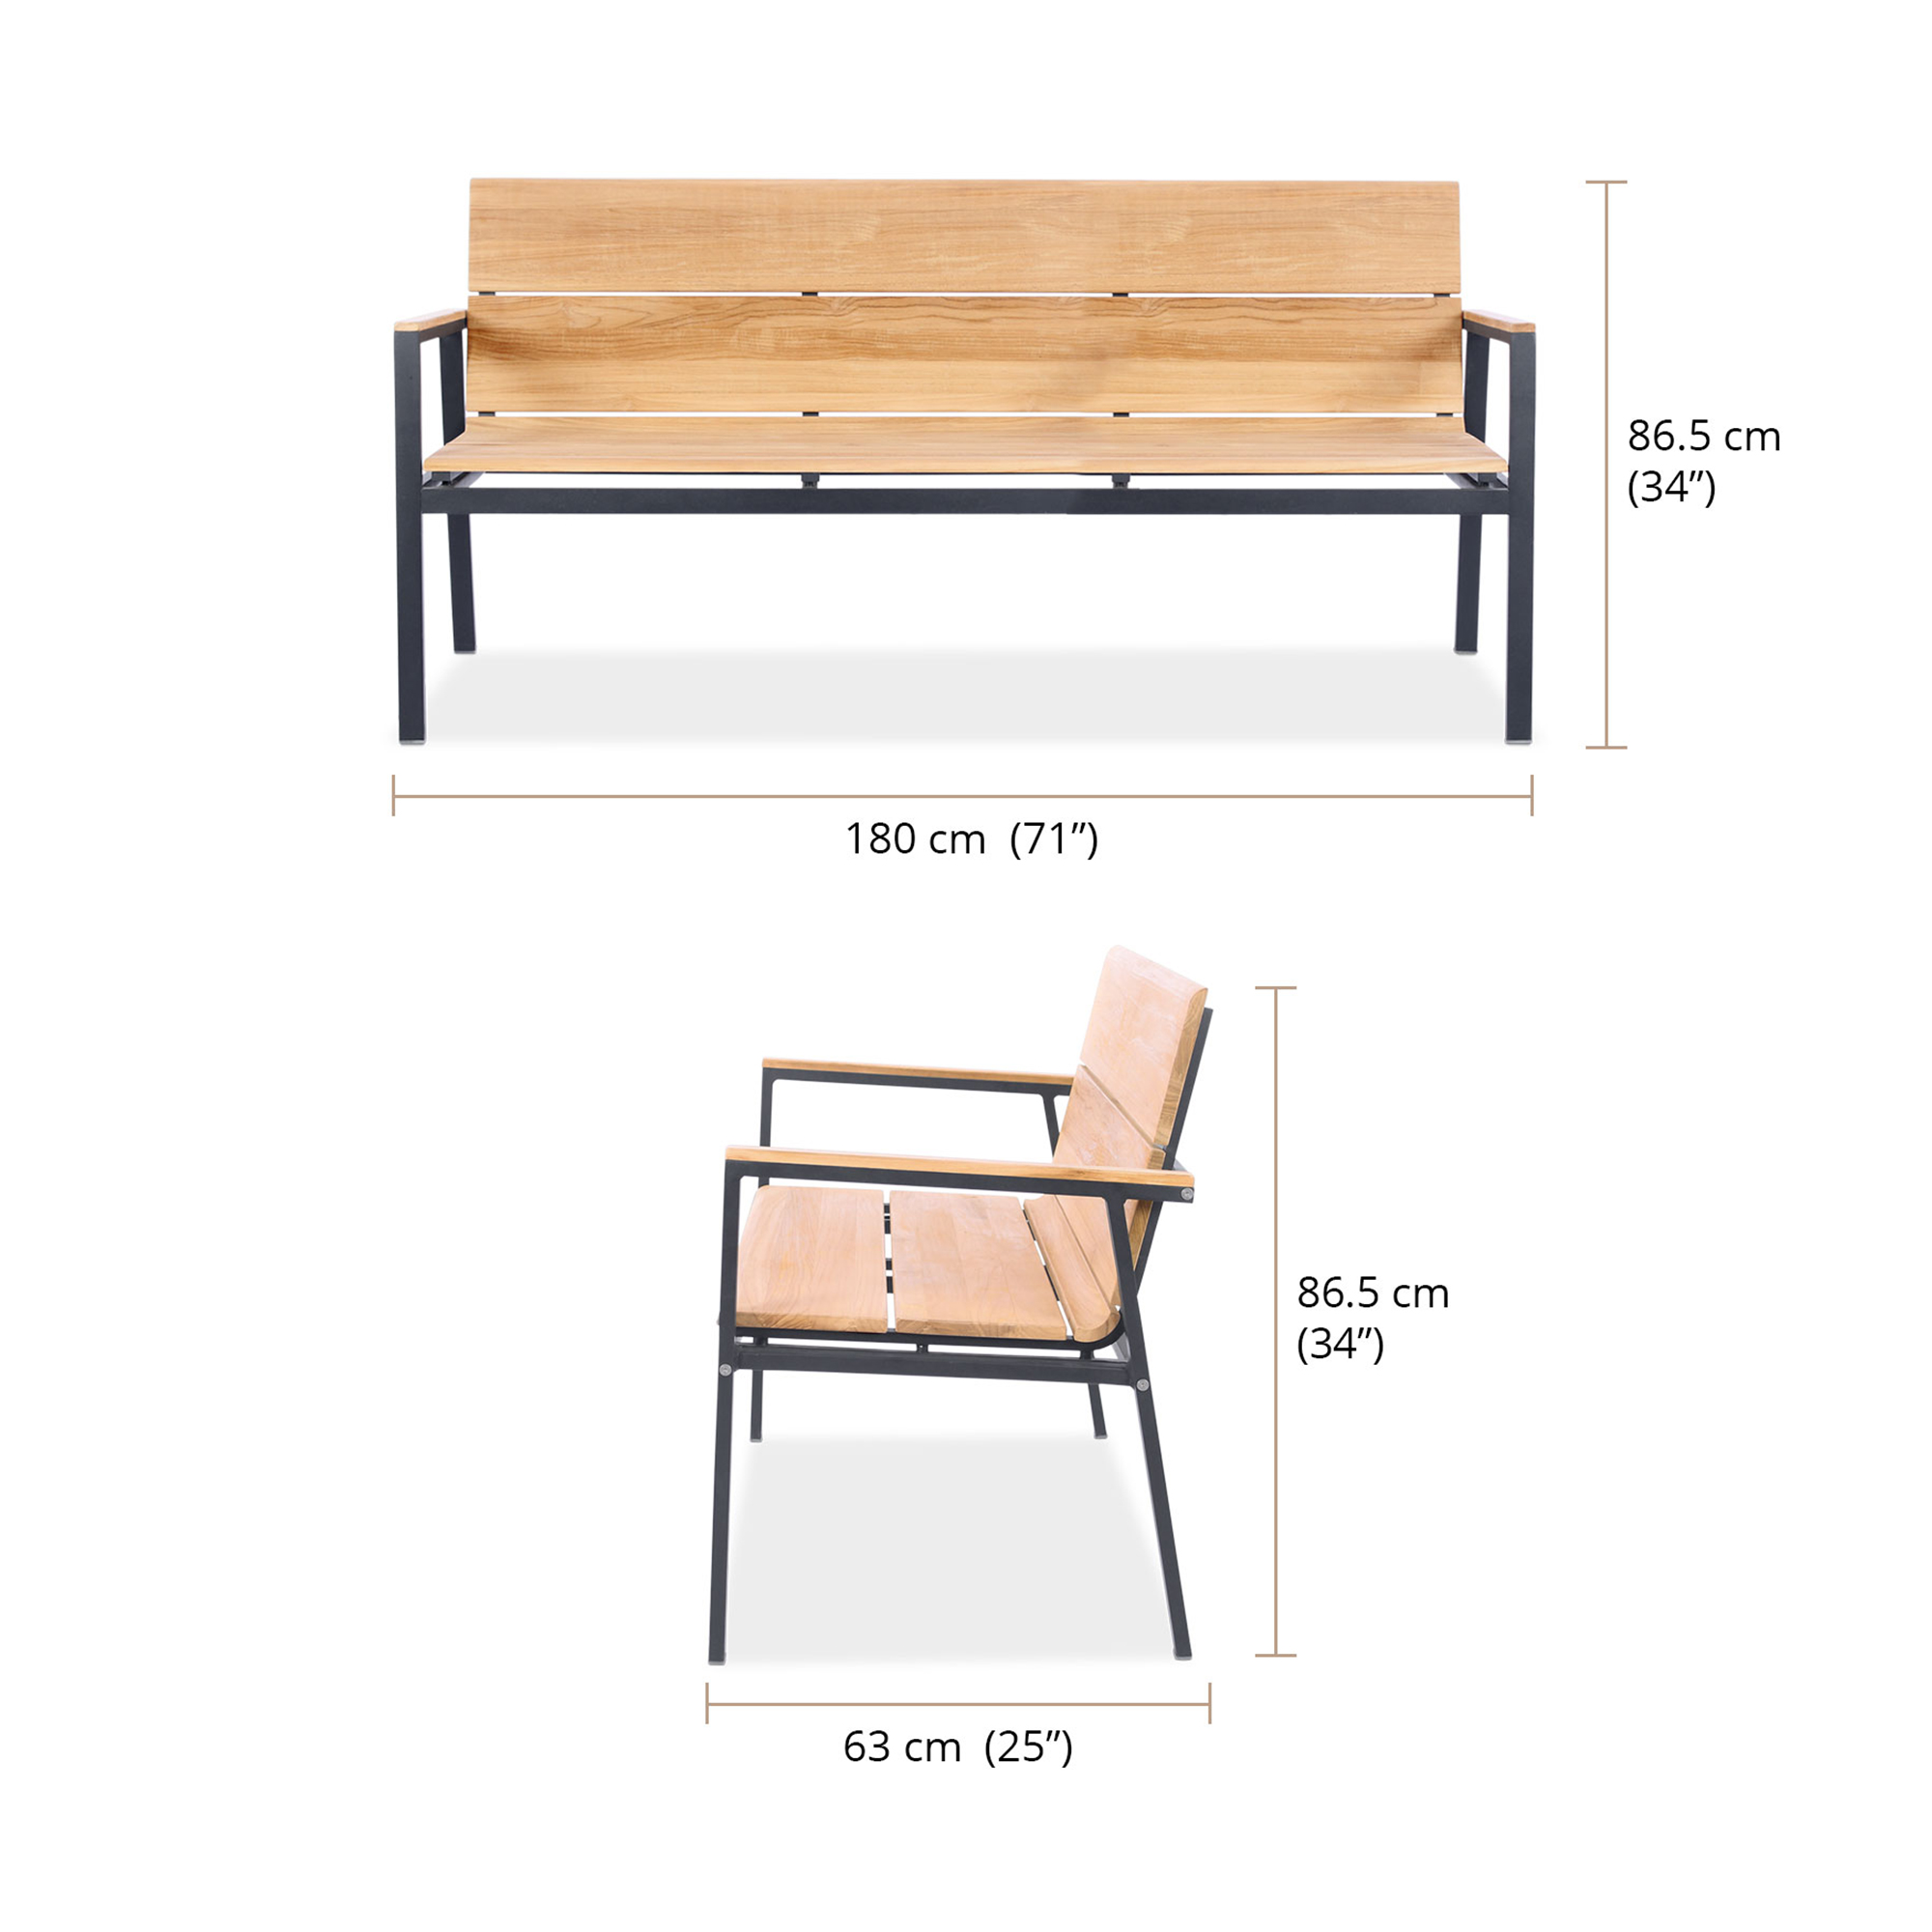 orva bench 180 dims